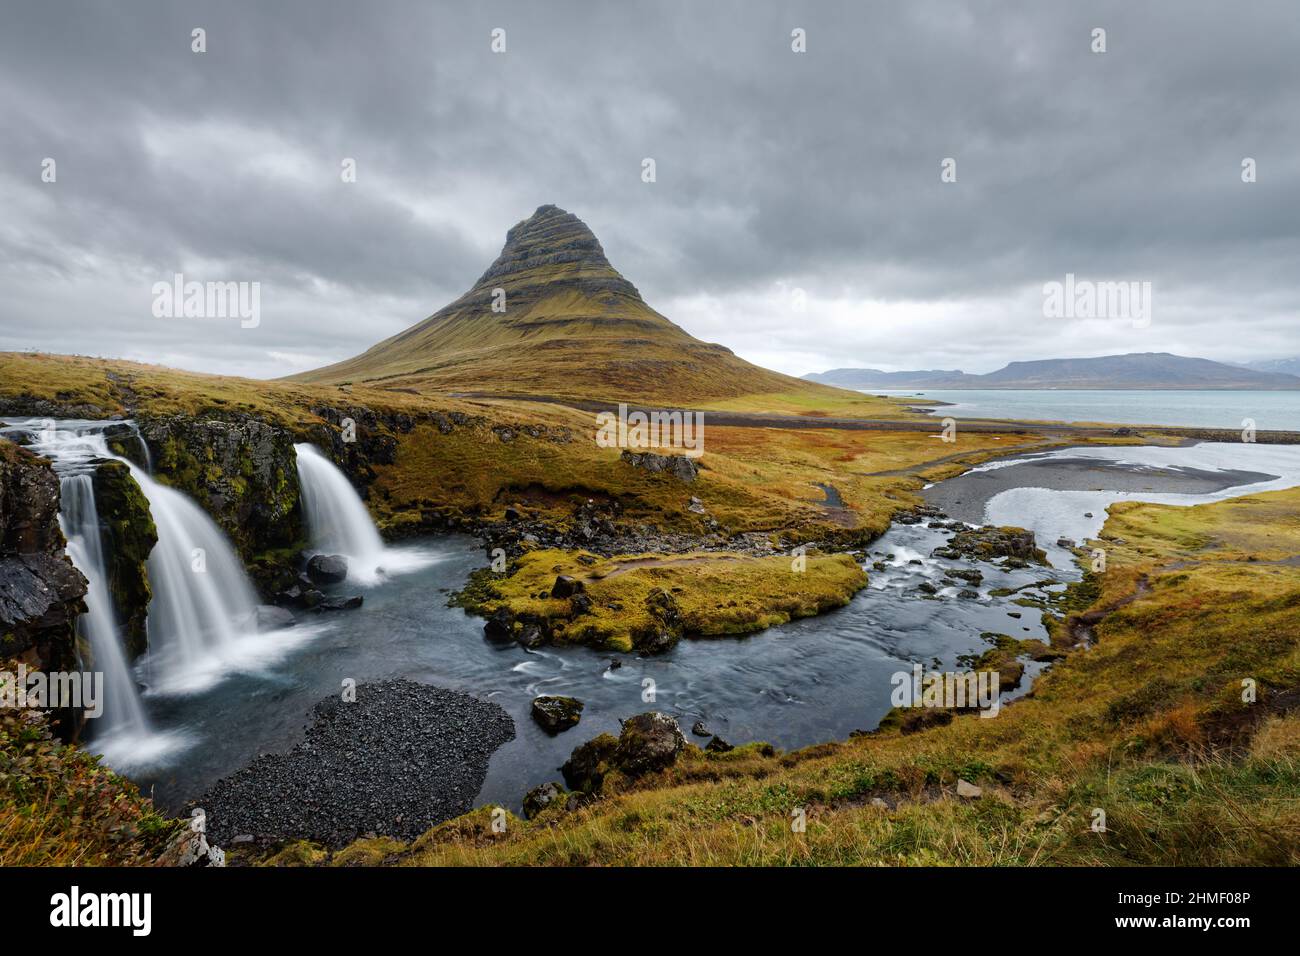 Panoramic view over a wide coastal landscape dominated by the prominent mountain Kirkjufell, in the foreground a waterfall and rapids, above a cloudy Stock Photo